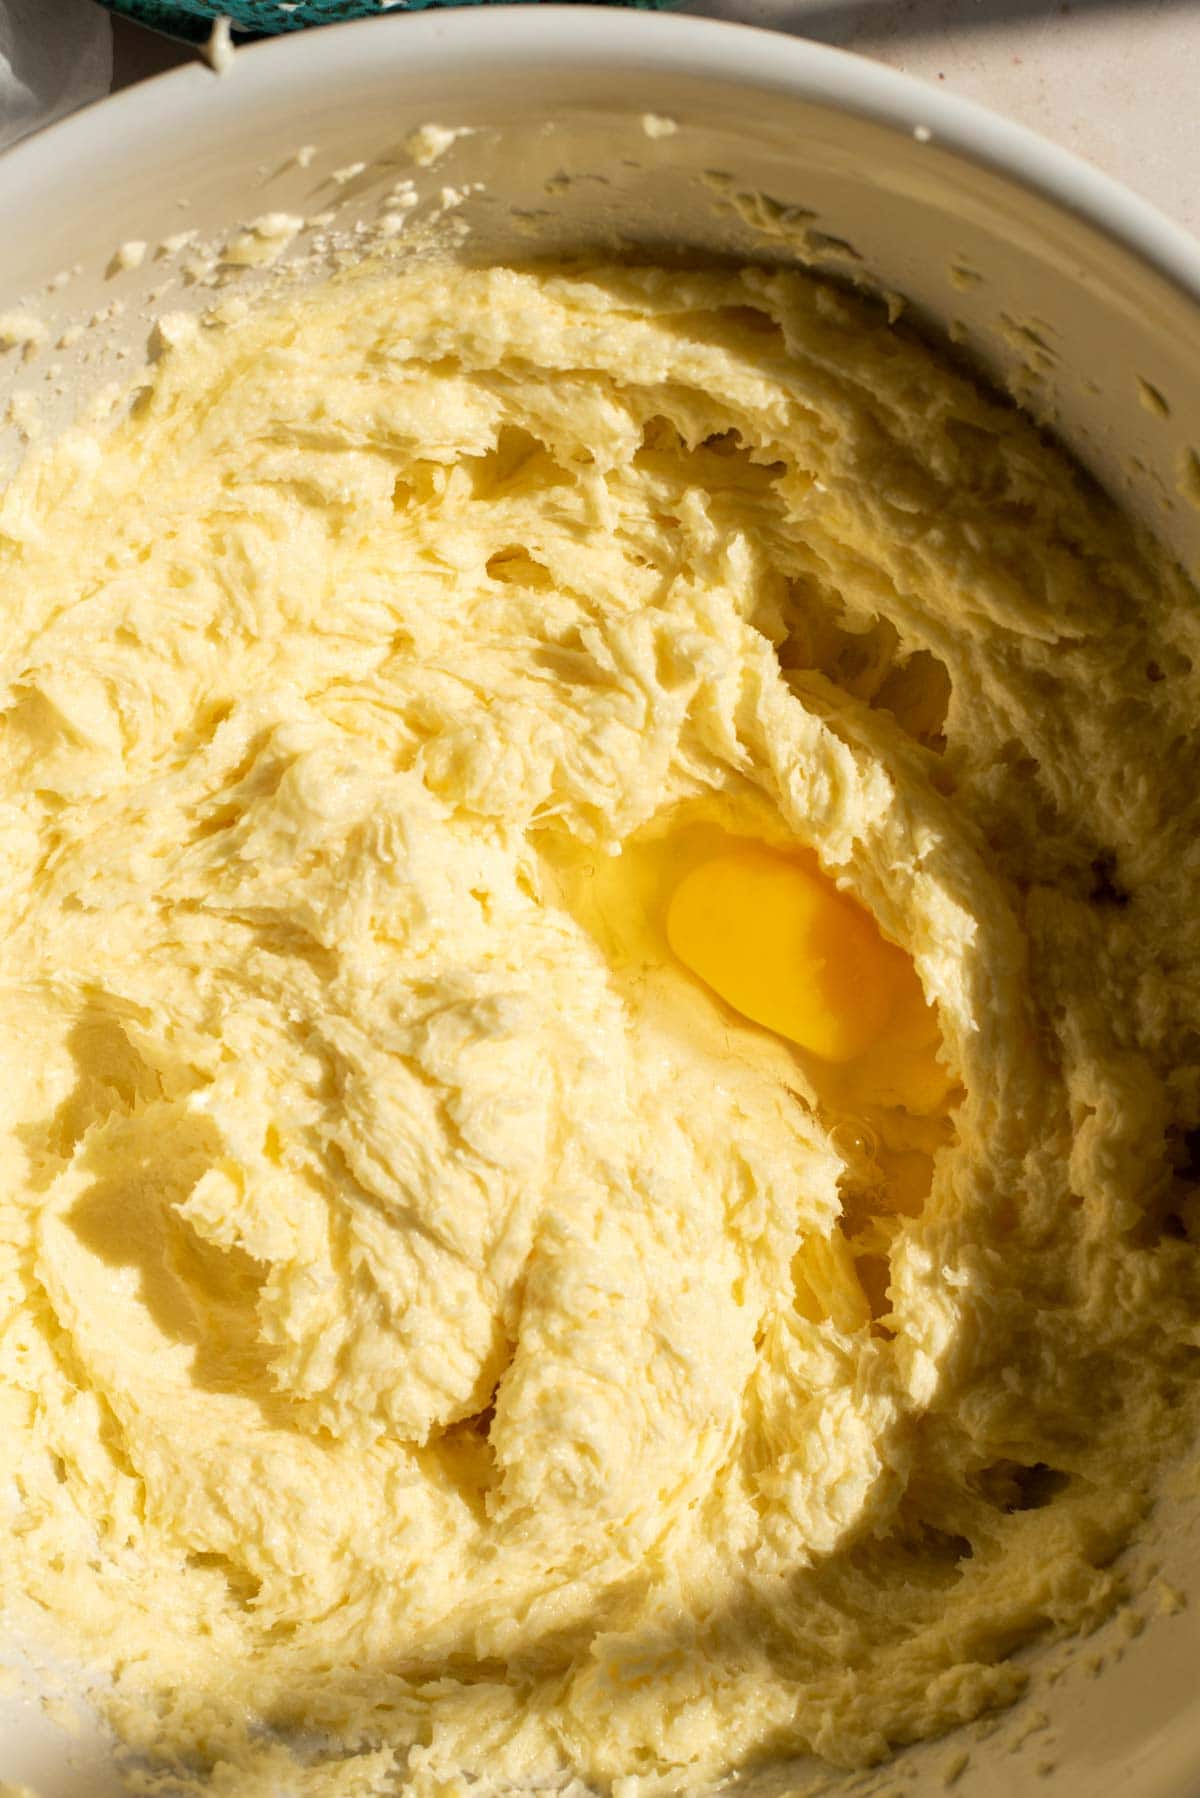 A mixing bowl full of beaten sugar, butter, and cream cheese with one egg yolk sitting in the middle.